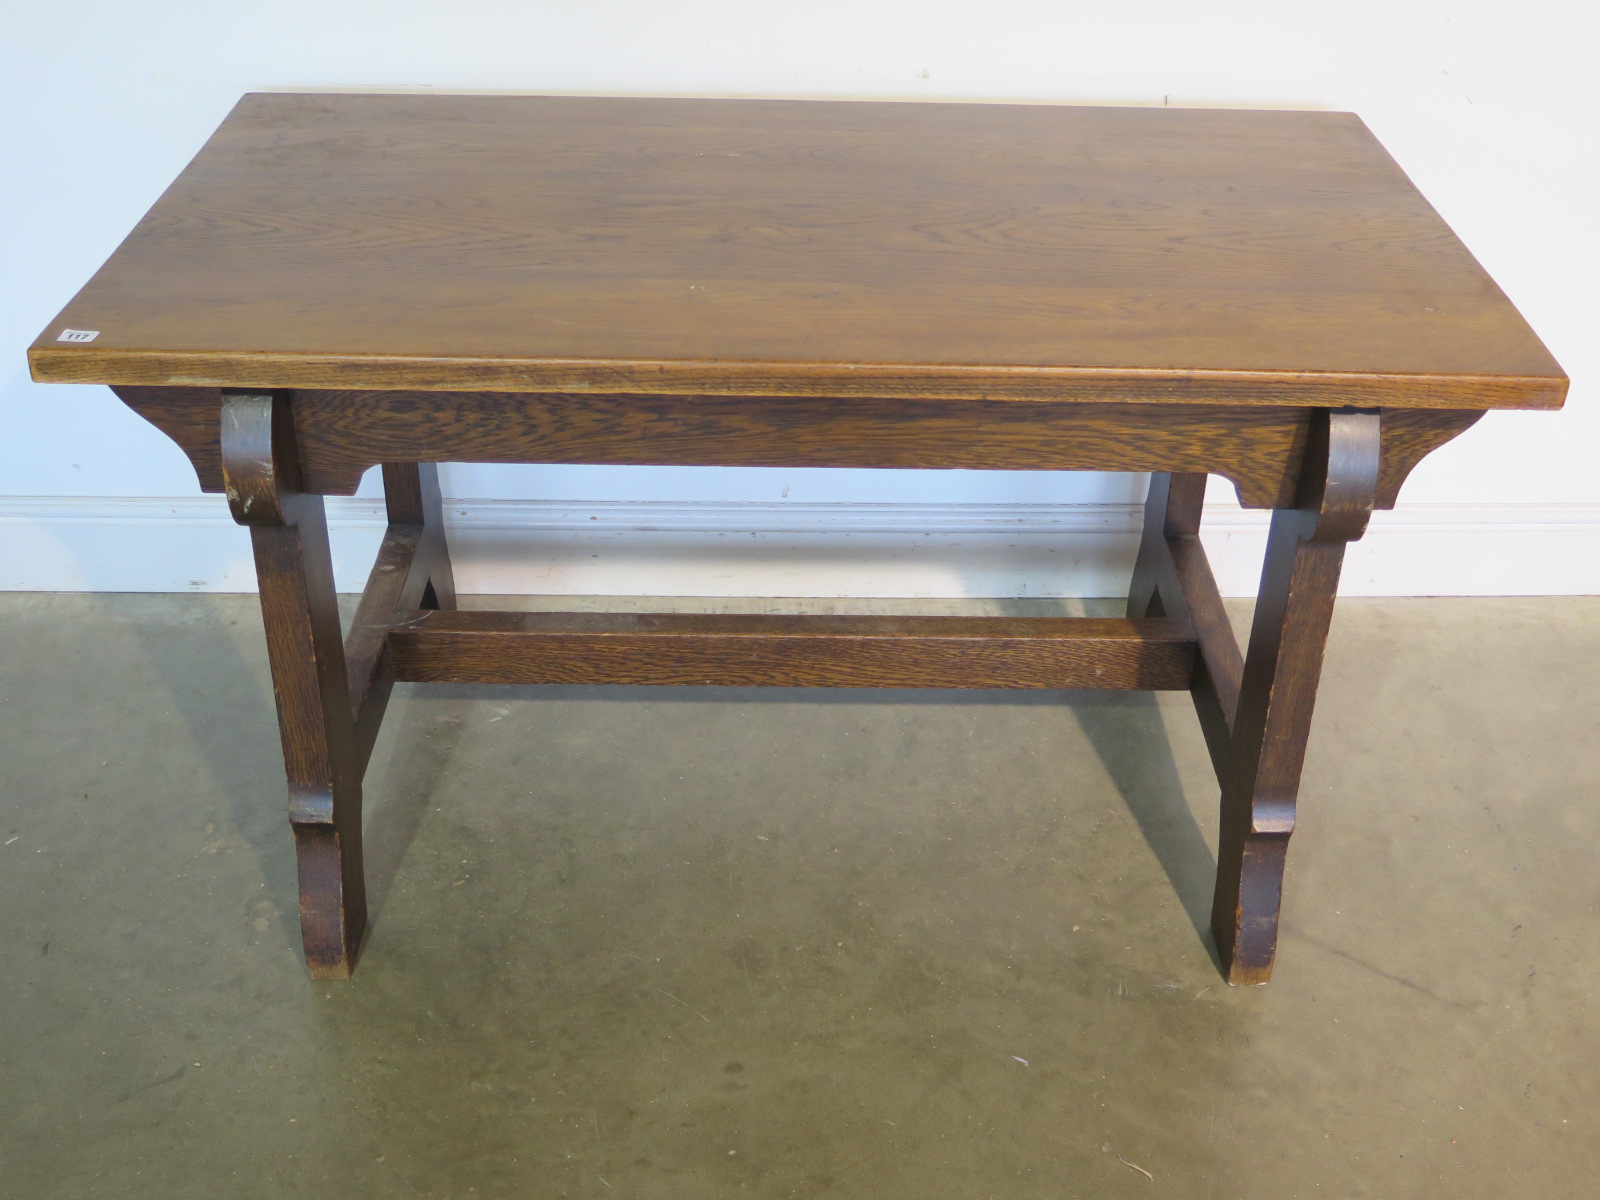 An oak Arts and Crafts refectory table - Height 75cm x 73cm x 135cm - removed from a Cambridge